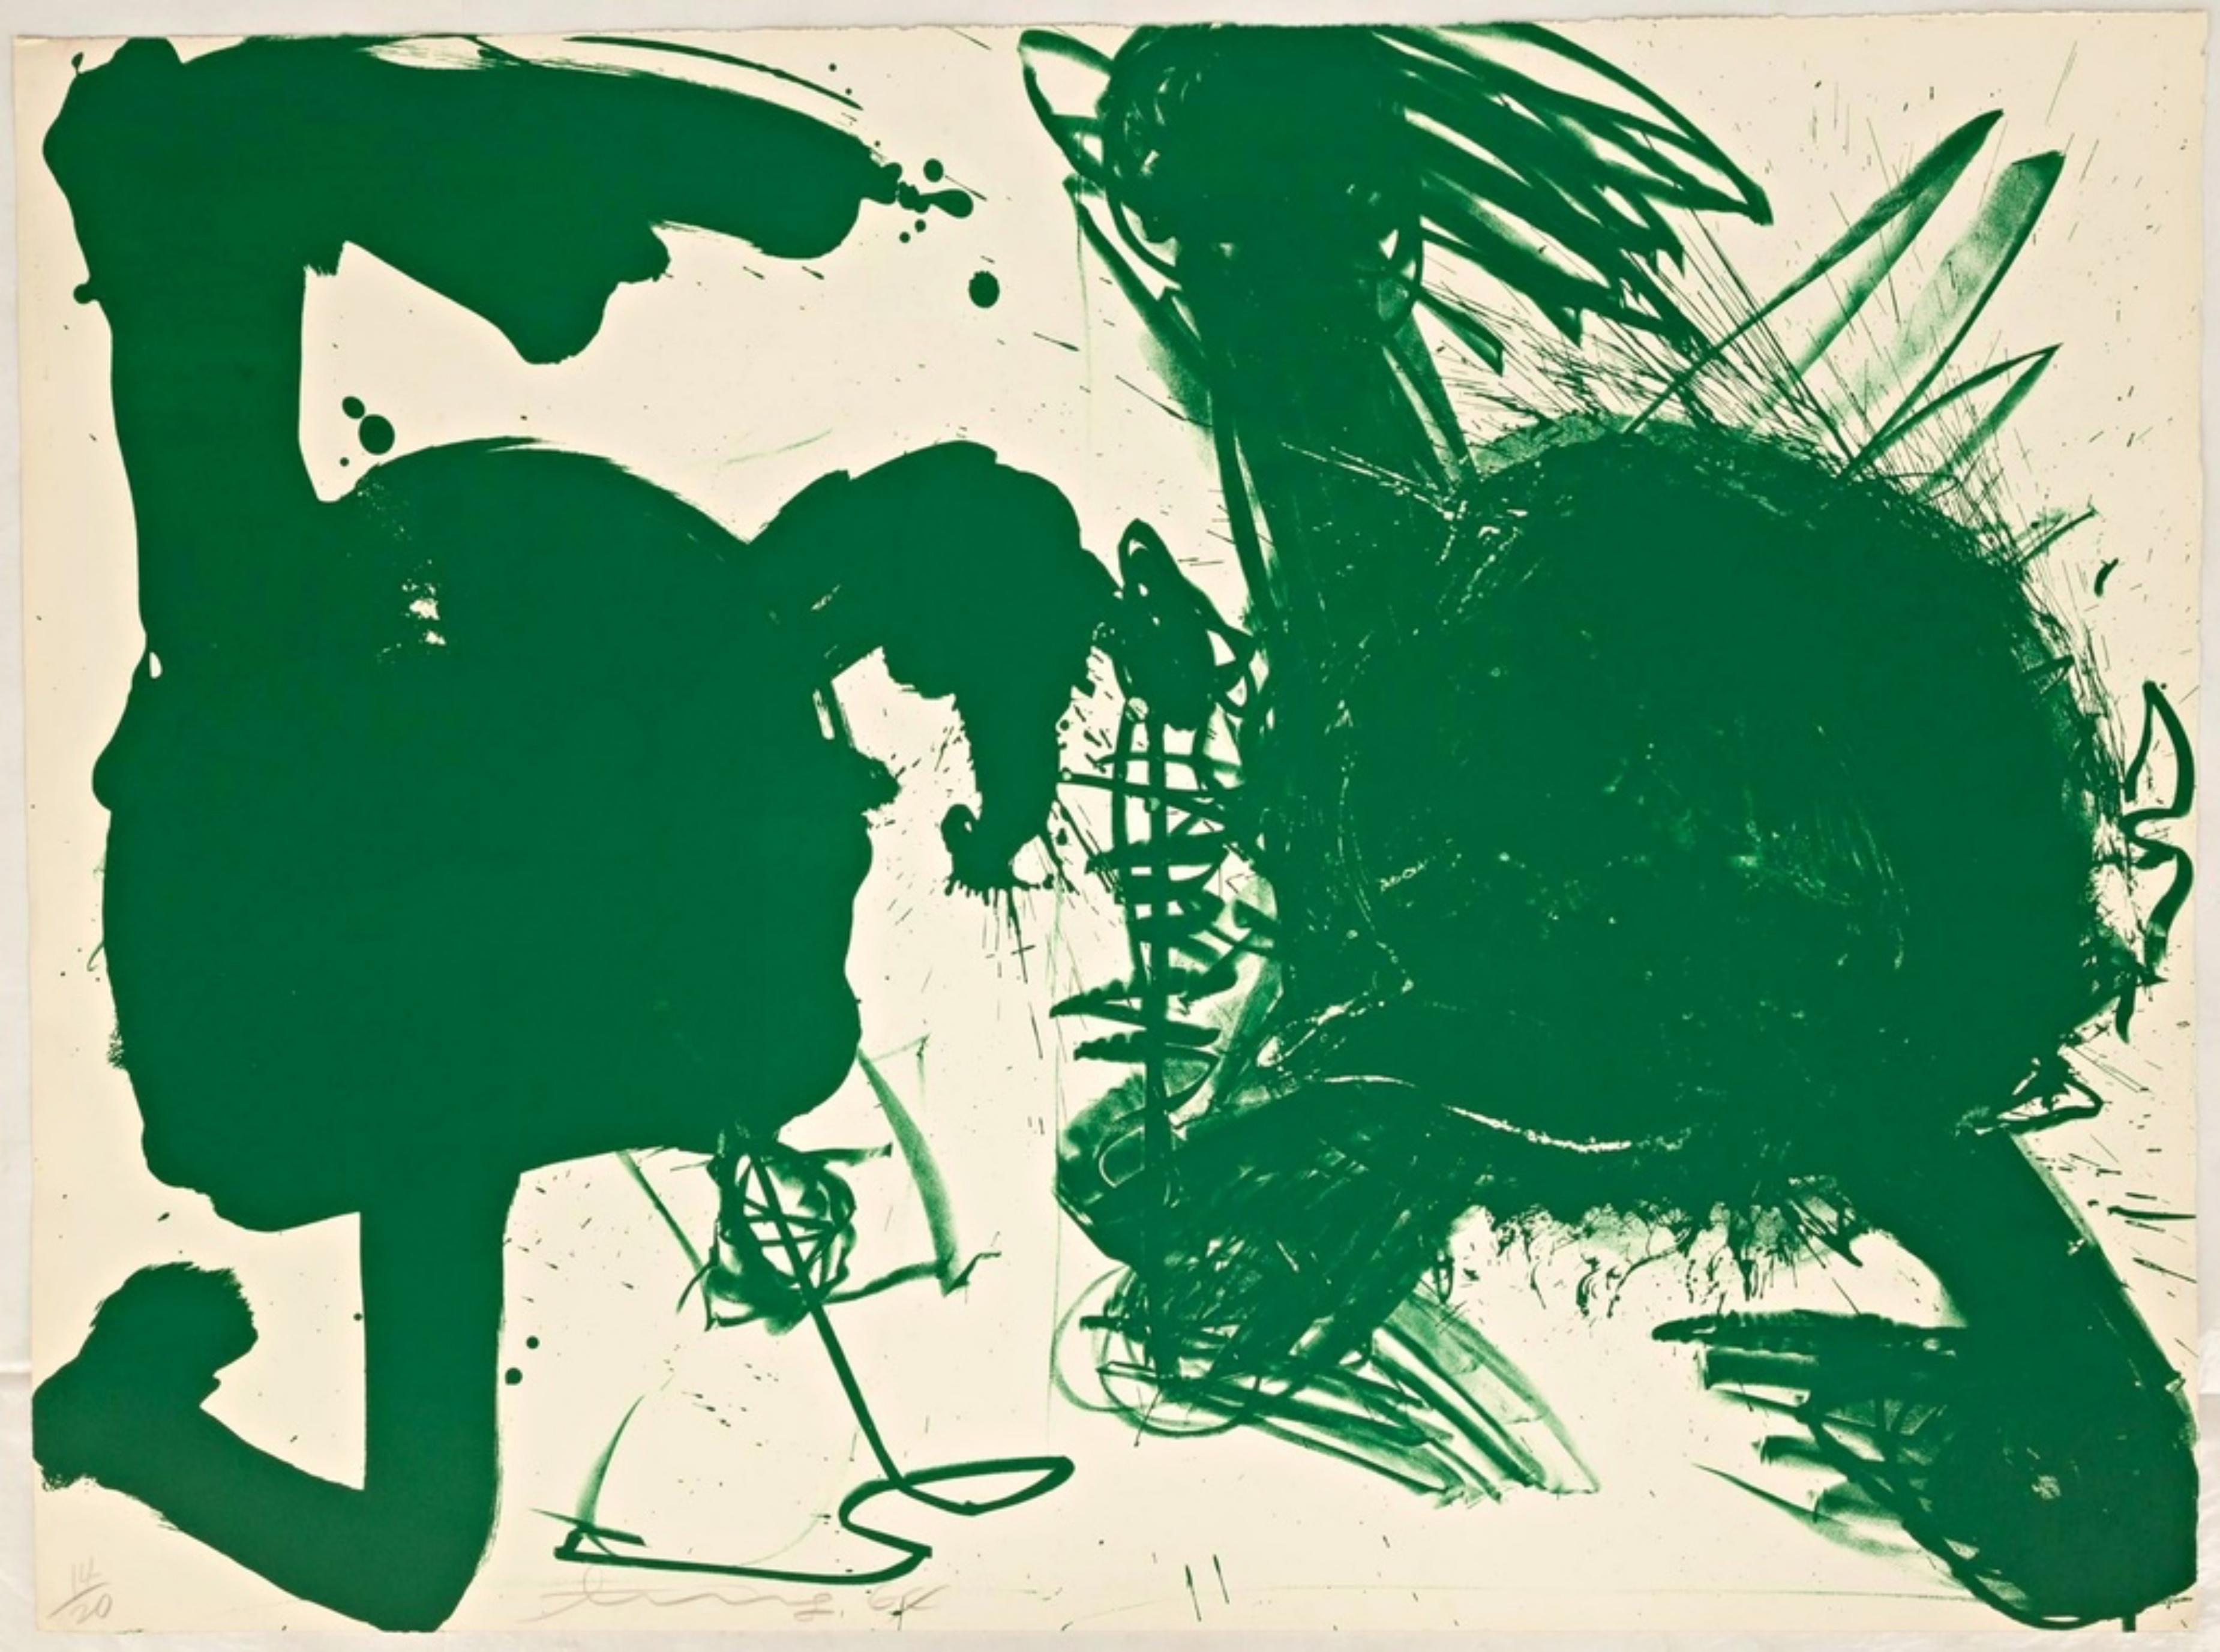 Abstract Print Walasse Ting - Bombshell, Hollywood Honeymoon (lithographie expressionniste abstraite signée)